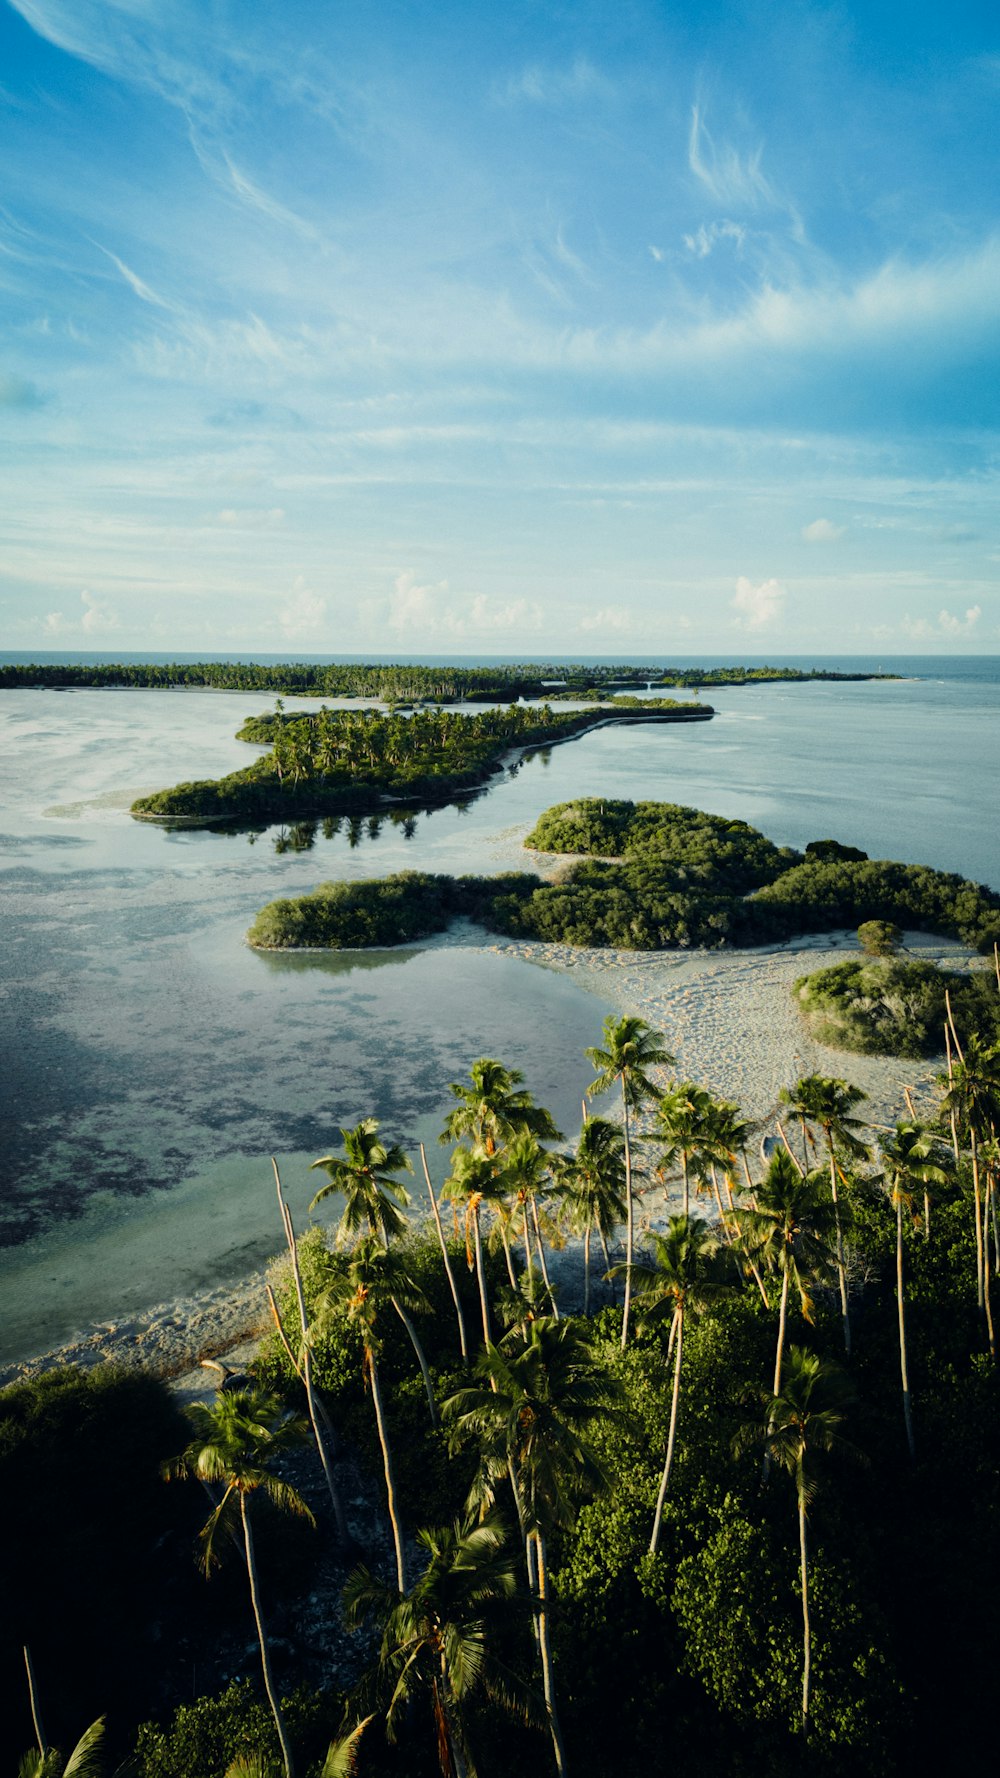 a group of small islands surrounded by palm trees